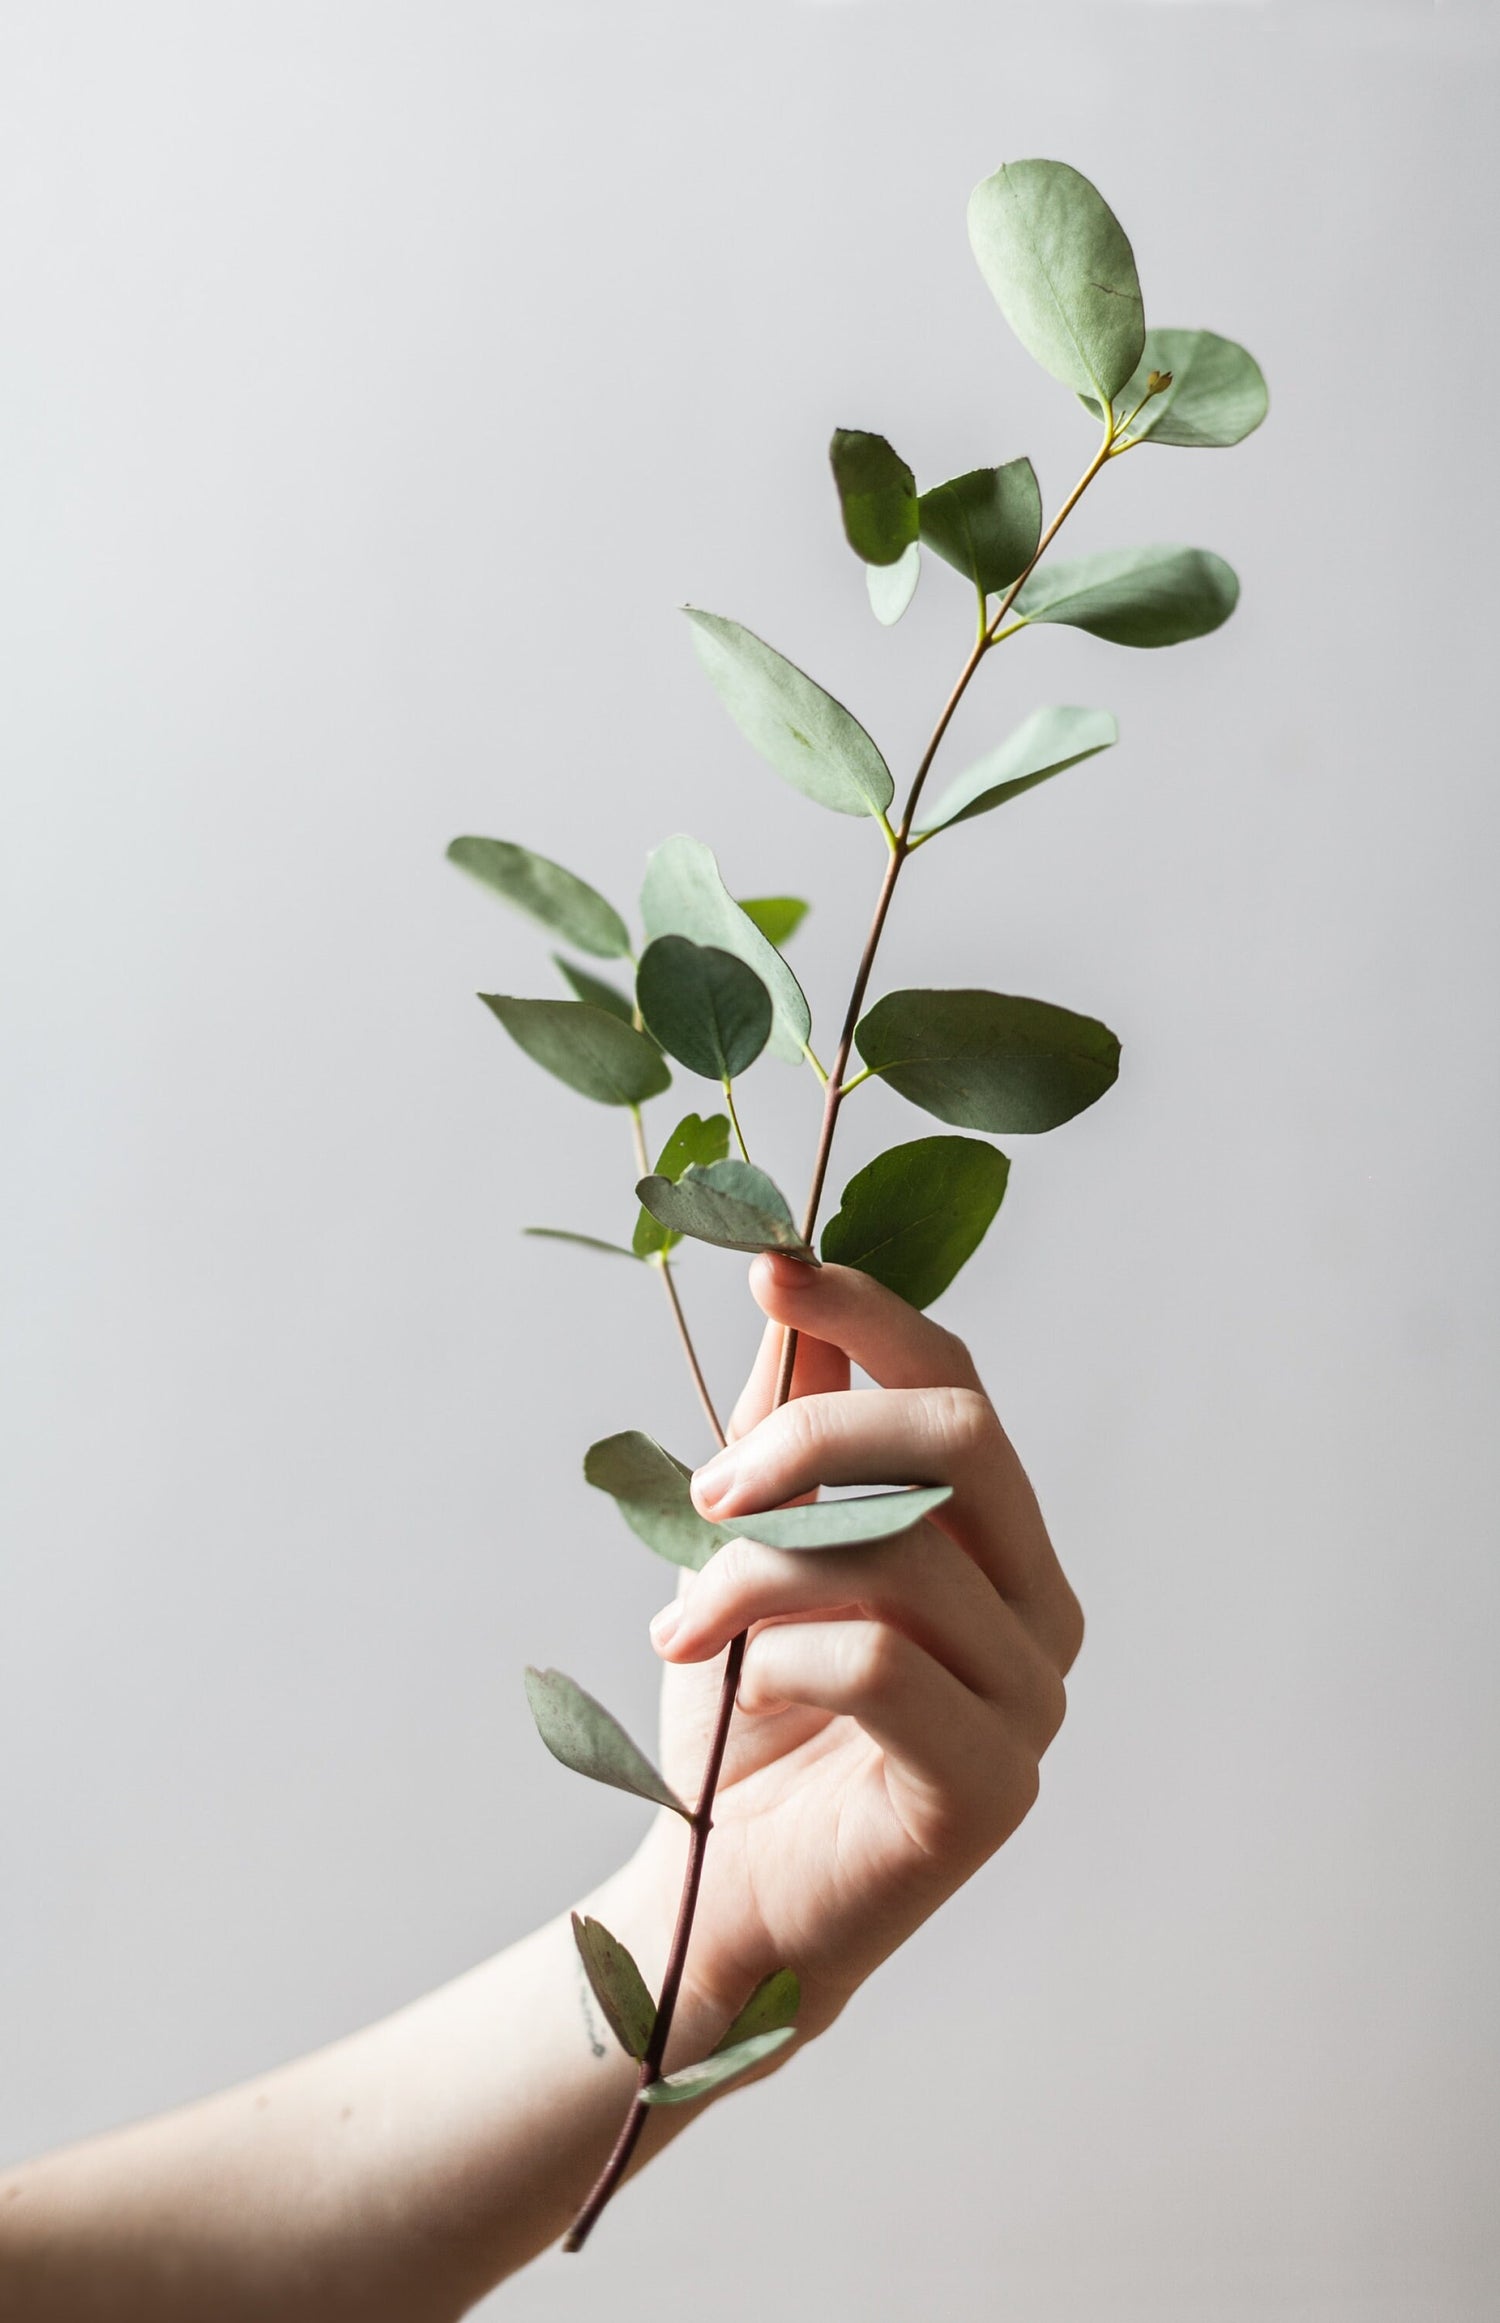 A single eucalyptus branch held in a hand against a white background, highlighting the fresh green oval-shaped leaves.